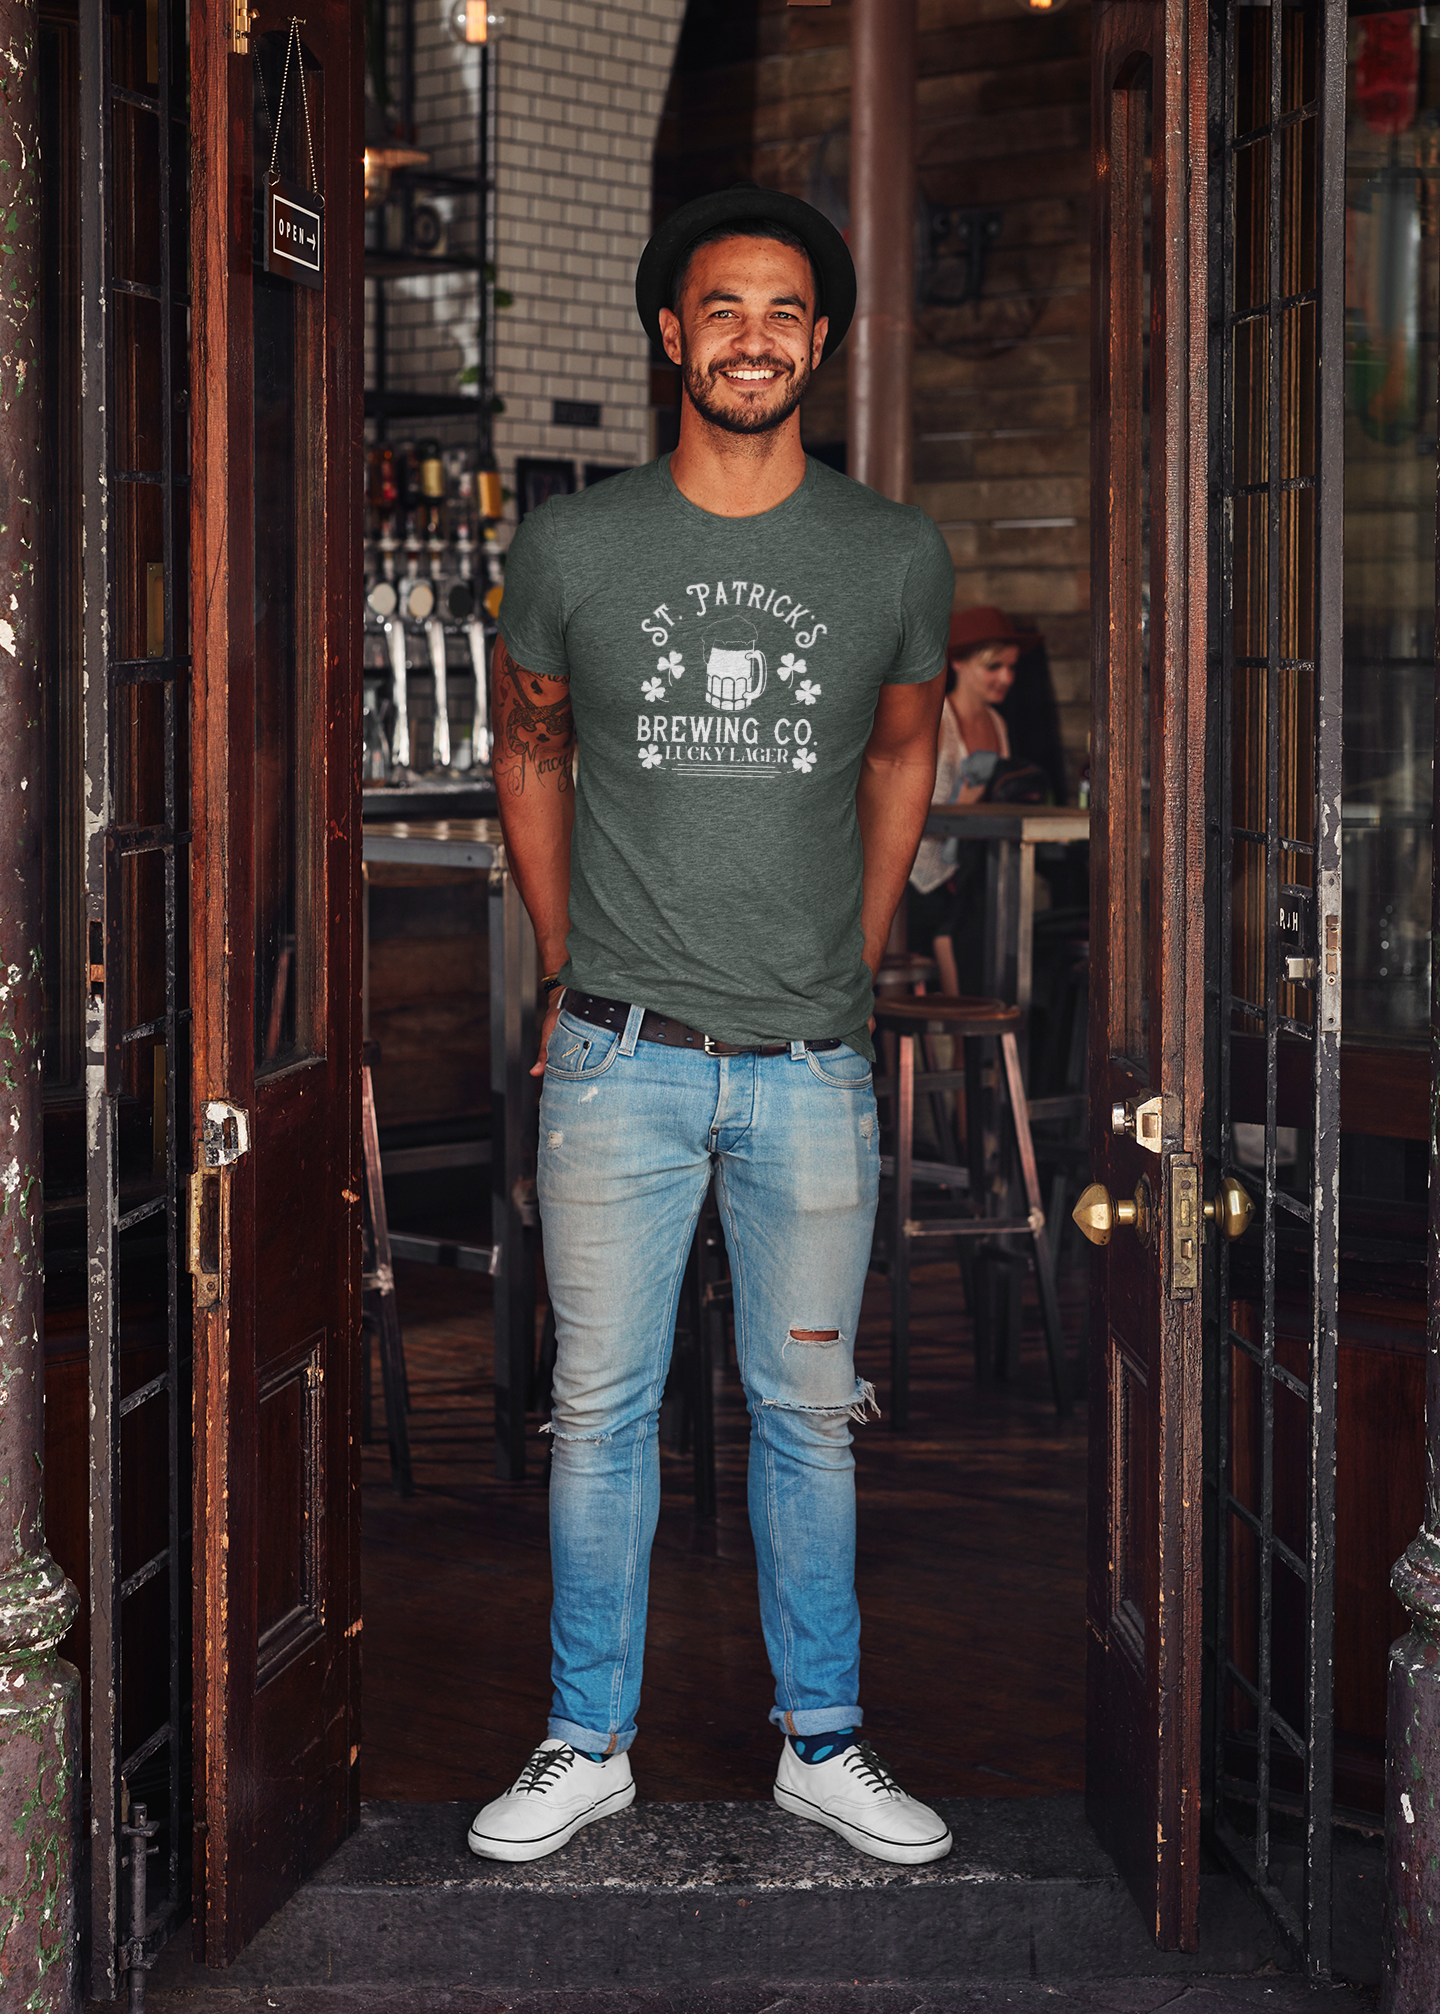 St. Patricks Brewing Co. T-Shirt in heather forest. The front has a white design with the saying "St. Patrick's Brewing Co. Lucky Lager" with a glass of beer and four leaf clovers surrounding the saying. This is the front view of the shirt on a male model standing between brown wooden doors of bar or pub smiling at the camera with his hands in his back pockets.